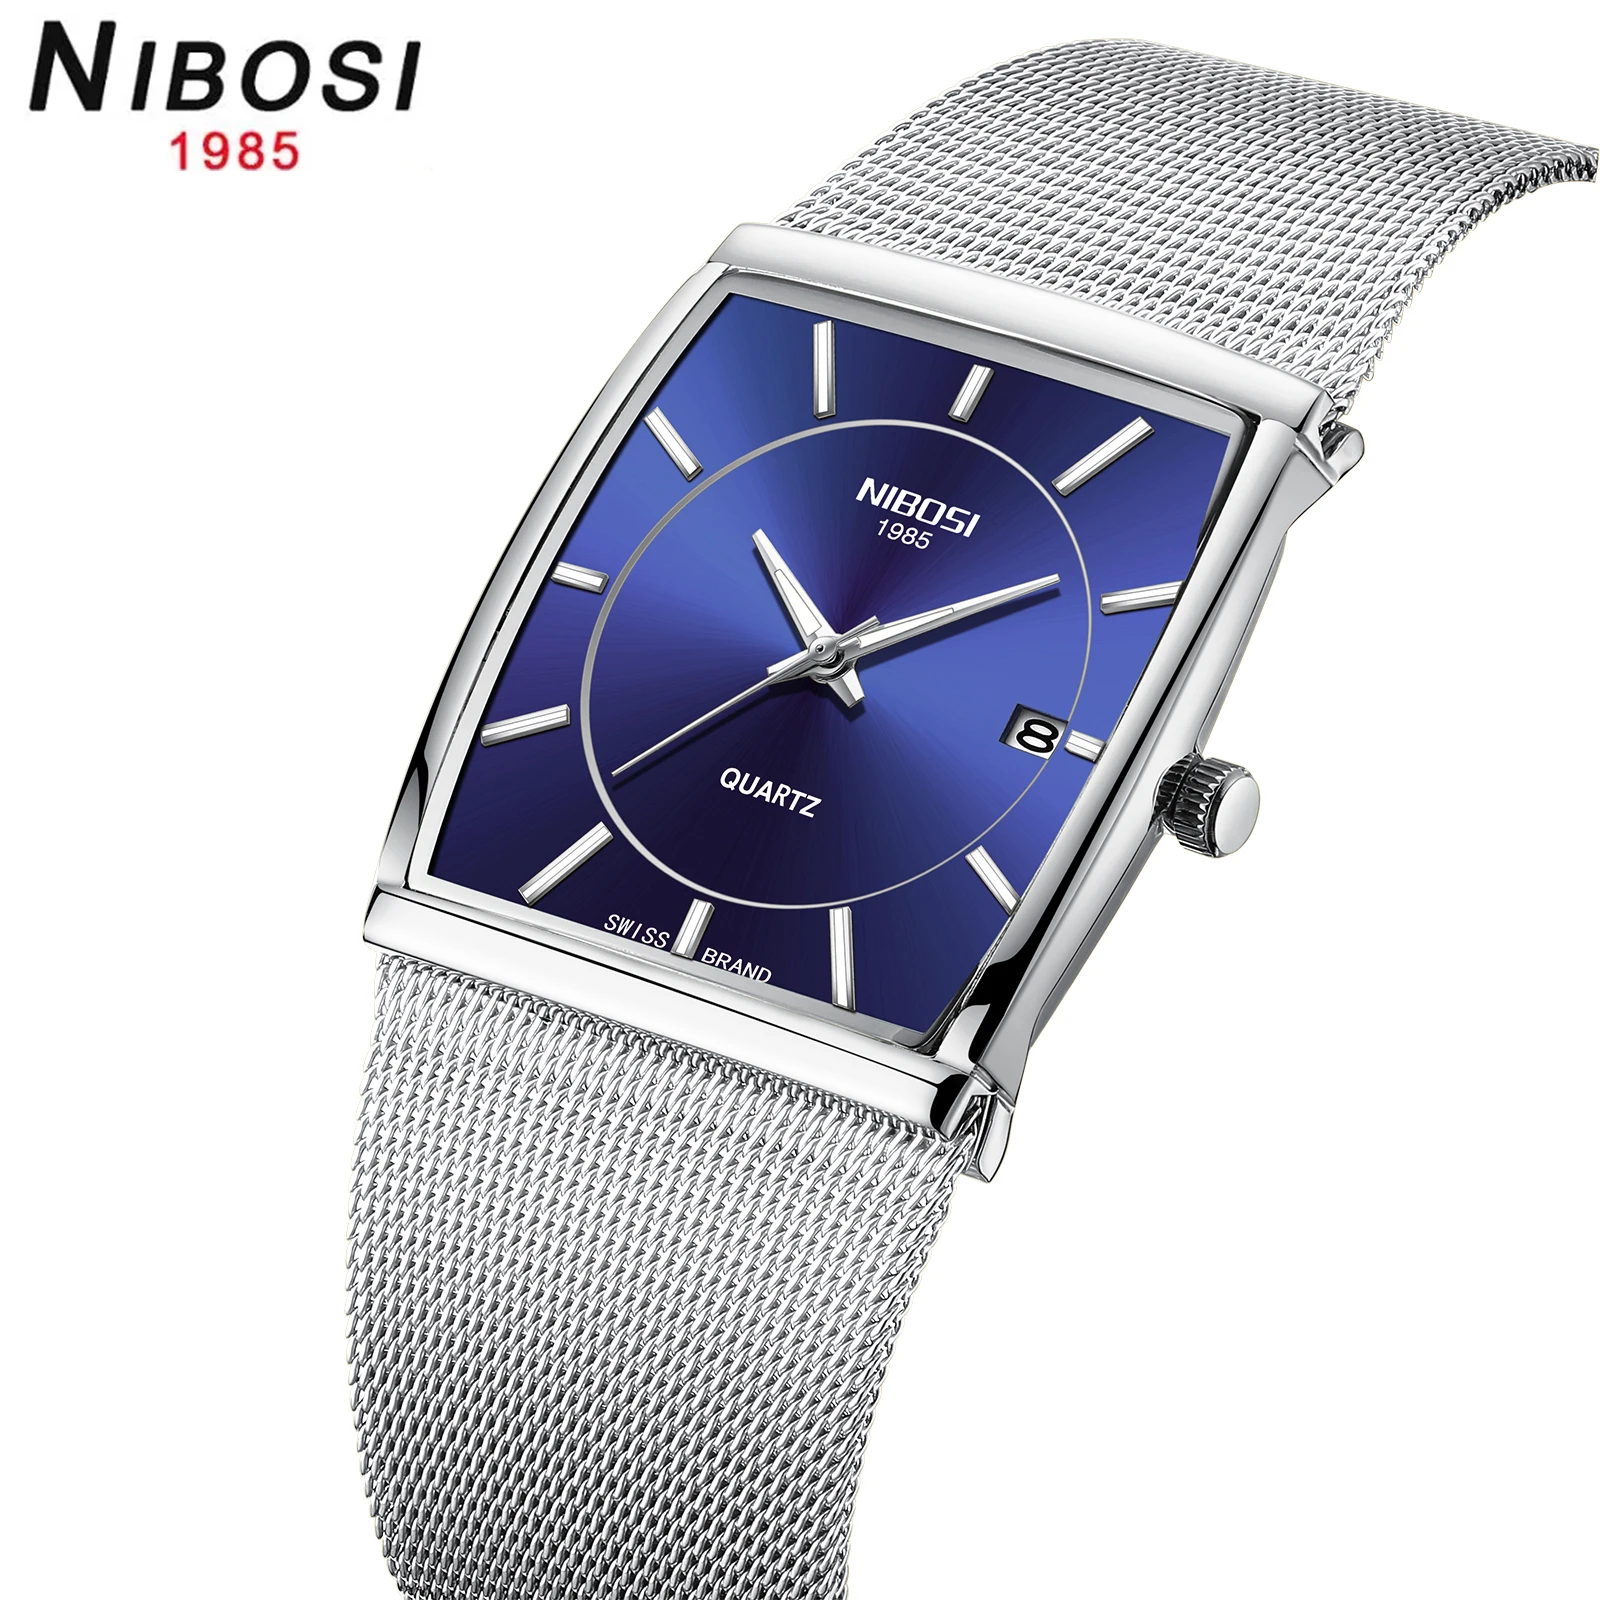 NIBOSI 2021 New Square Mens Watches Top Brand Luxury Creative Ultra Thin Wristwatches for Men Waterproof Auto Date Relogio